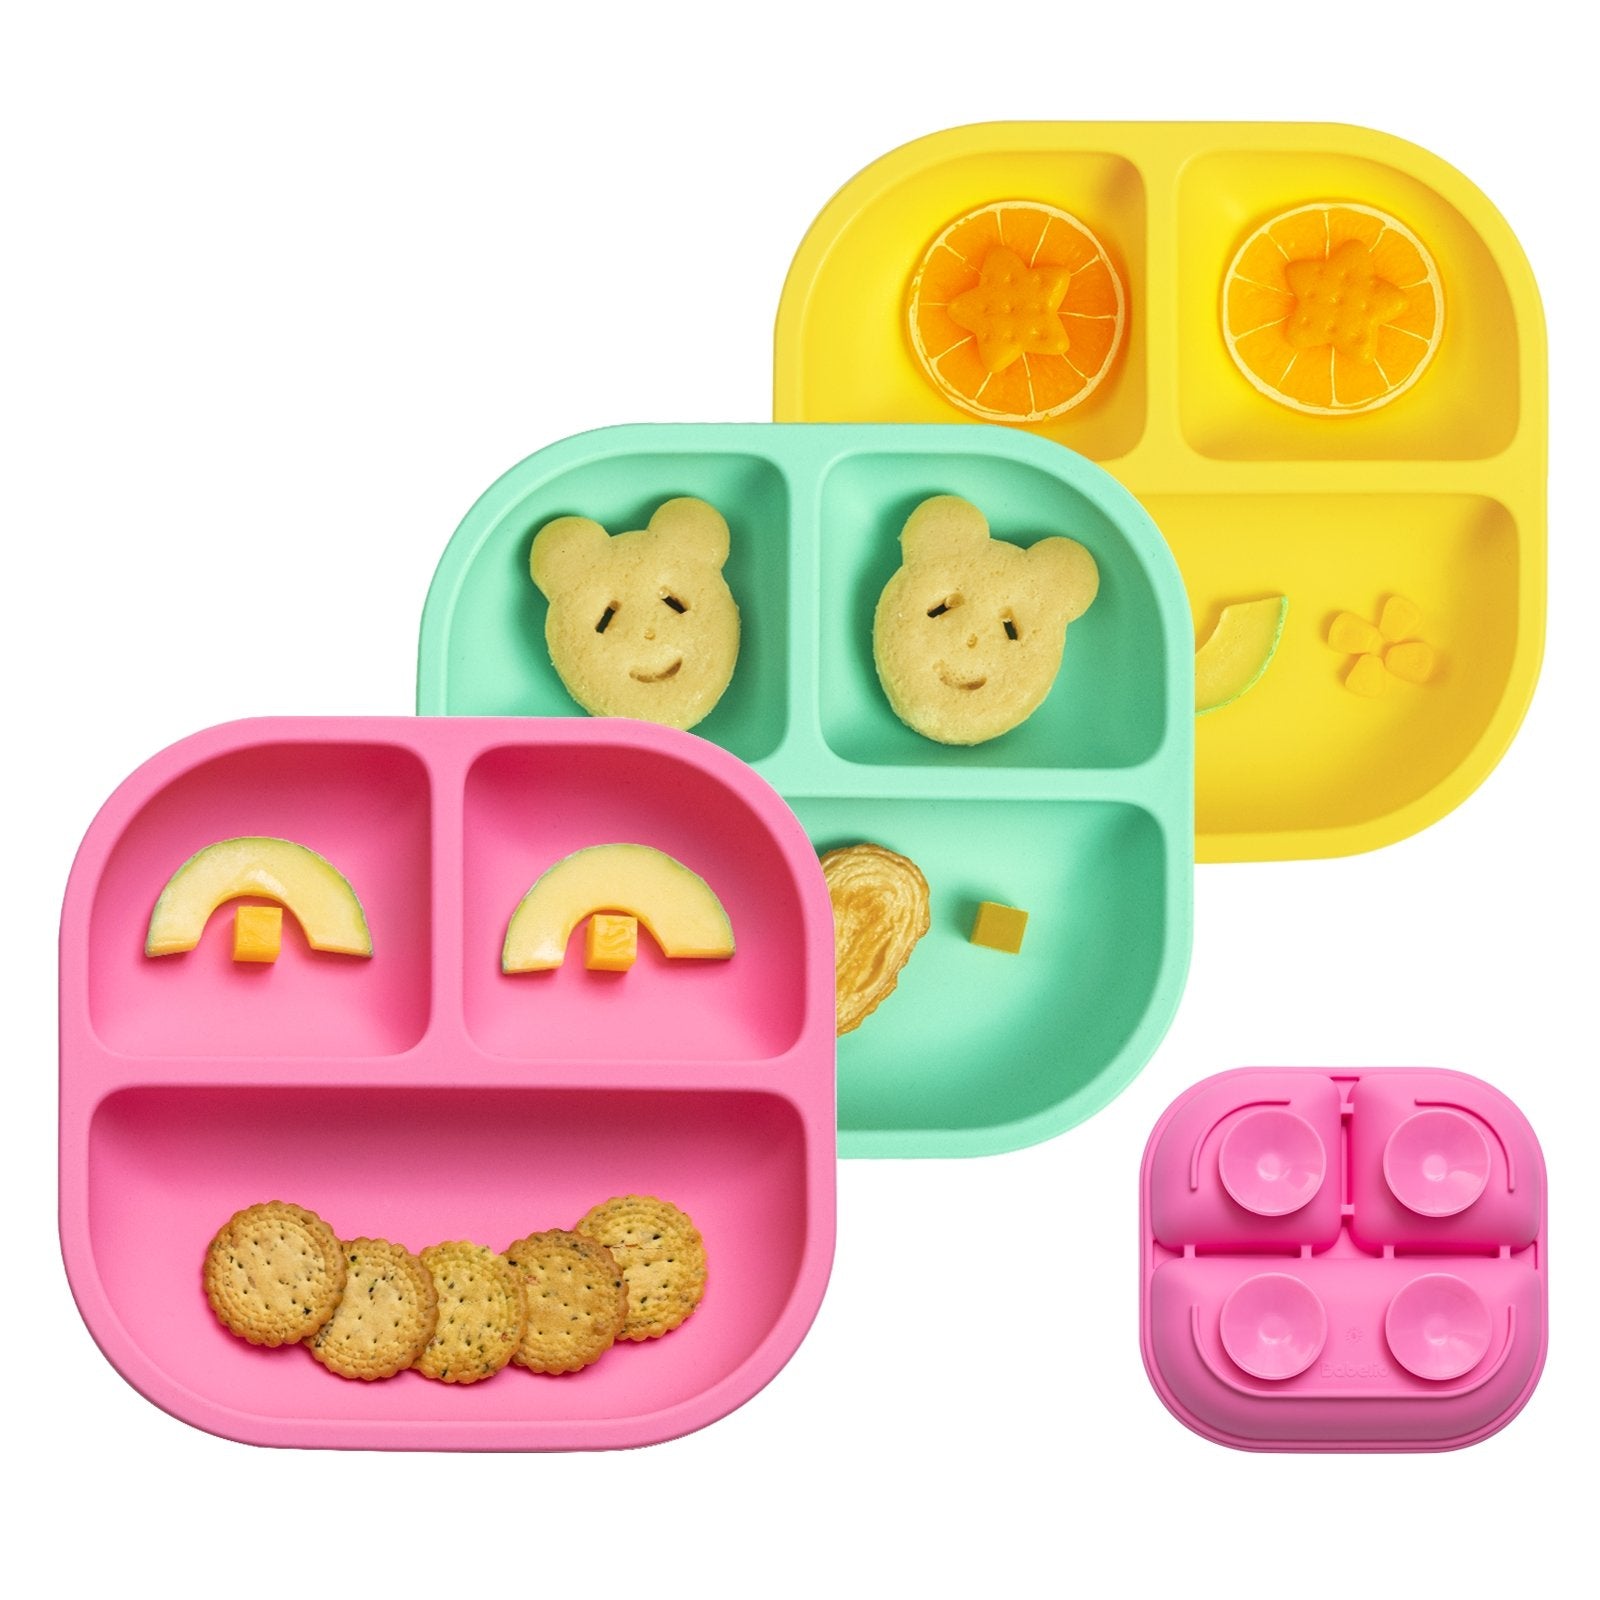 12 Baby Suction Plates That Stay Put